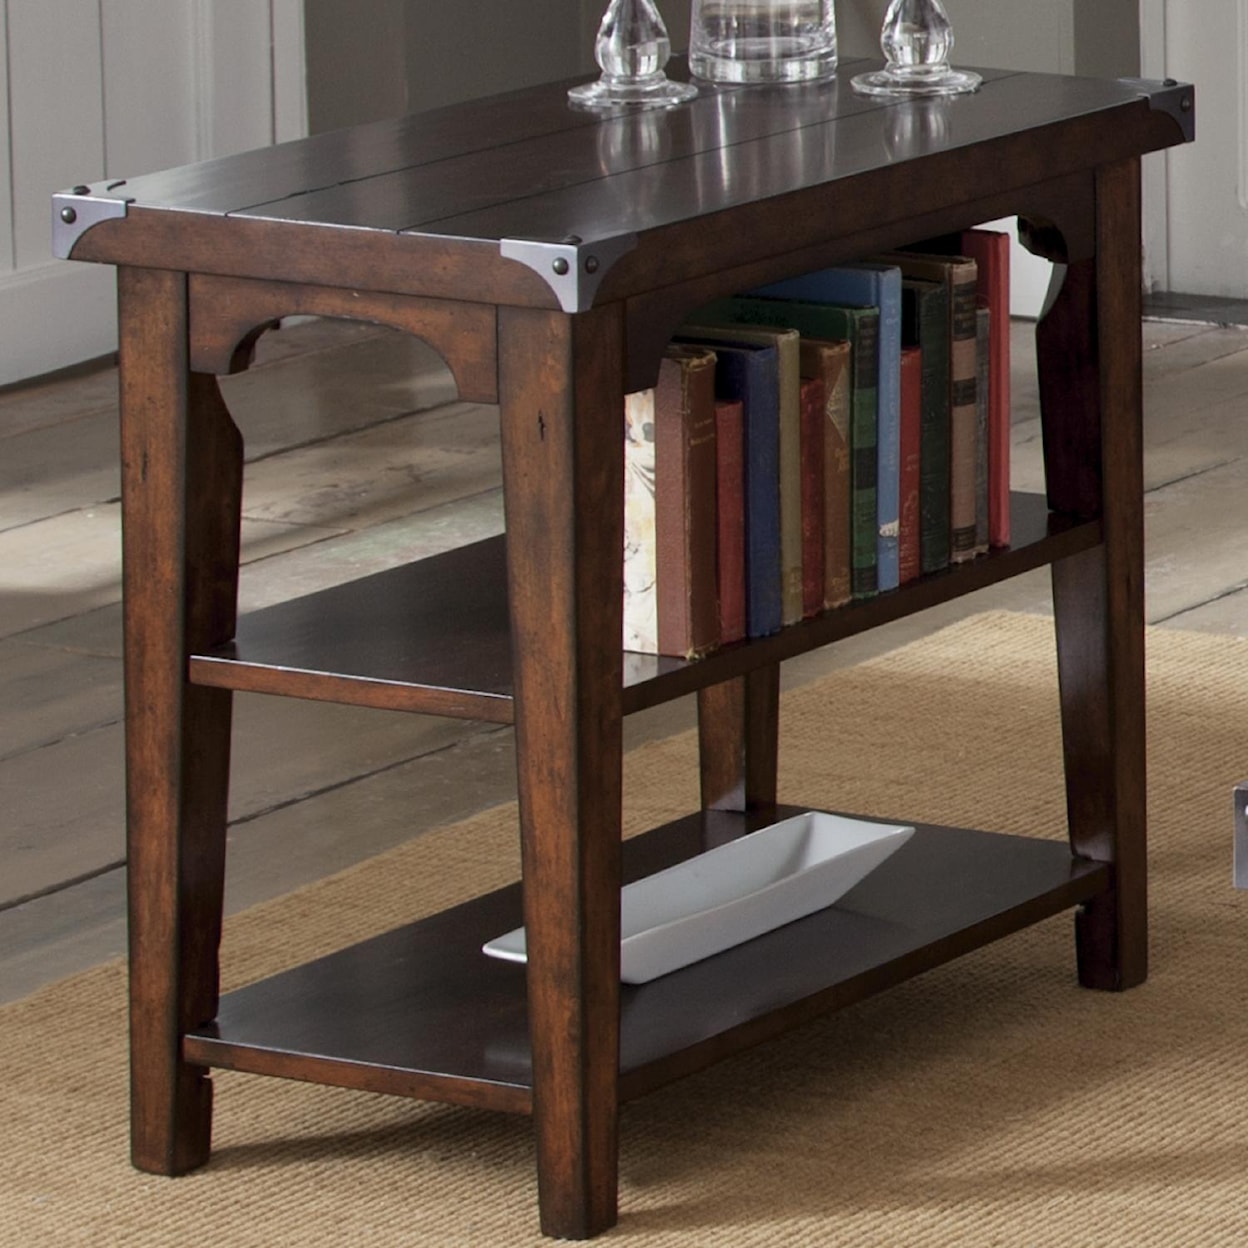 Liberty Furniture Aspen Skies Chairside End Table